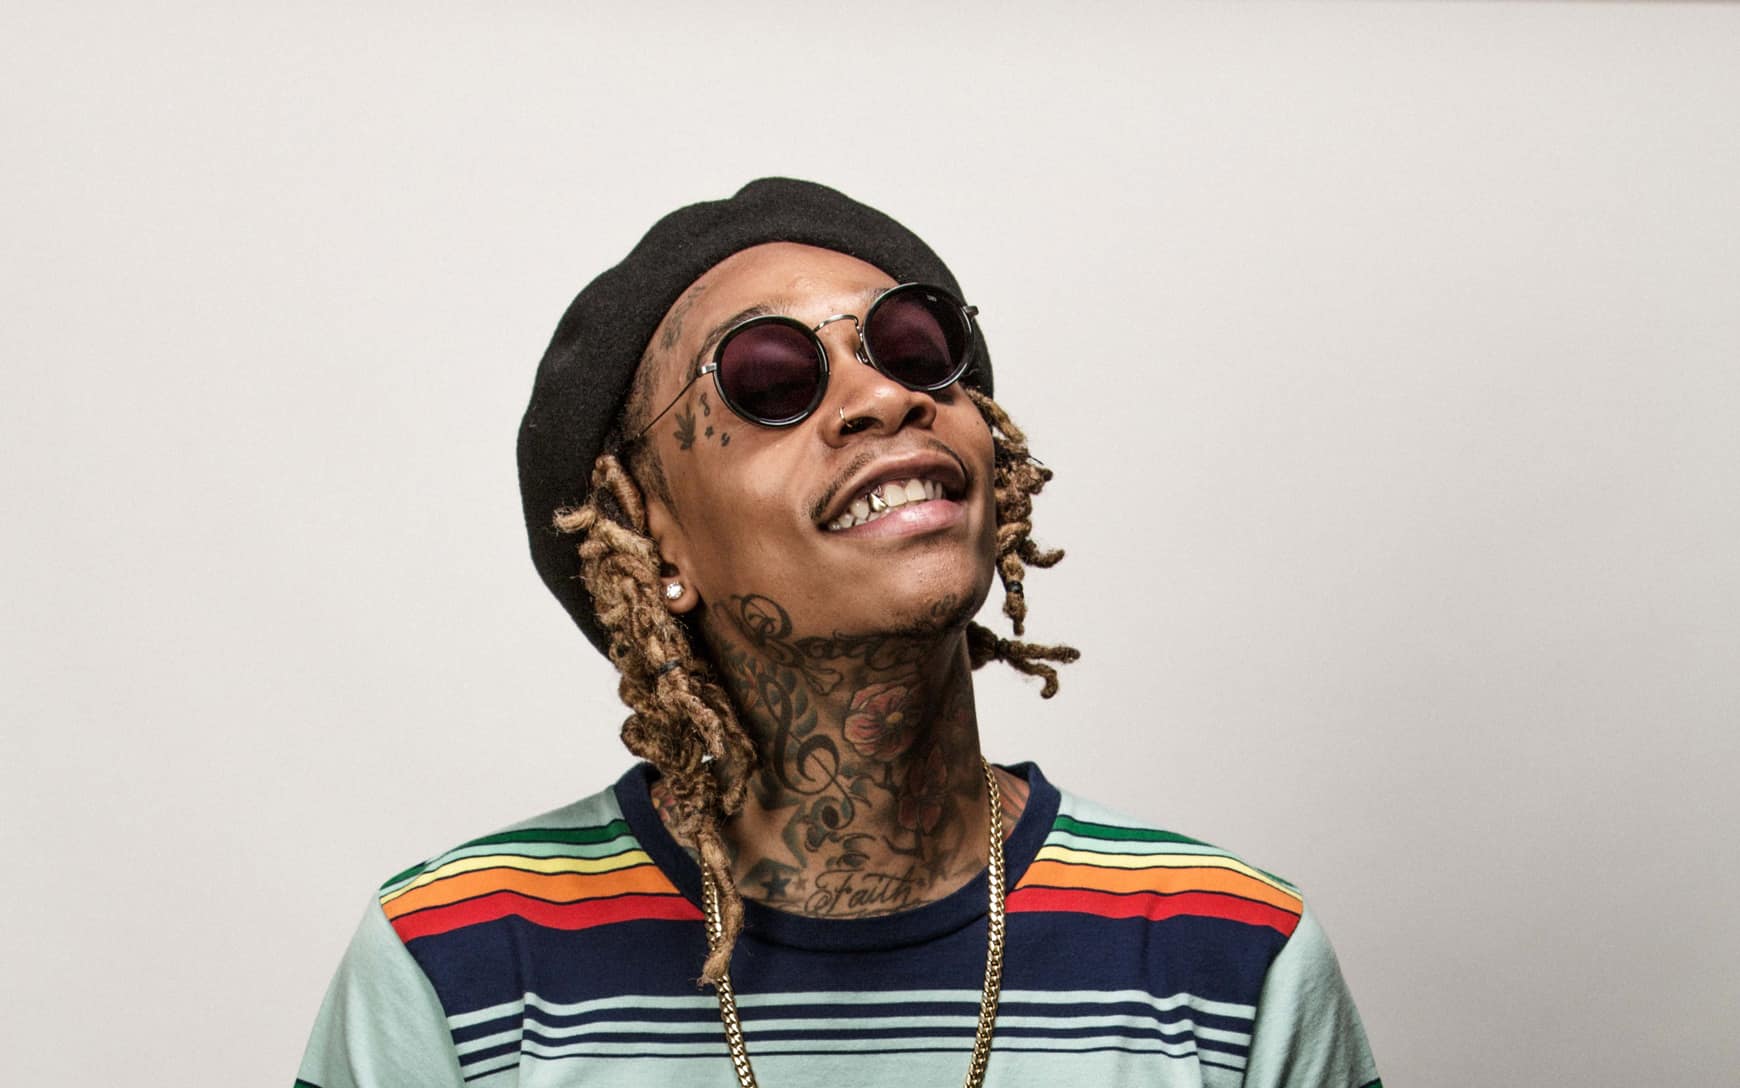 Best Wiz Khalifa Quotes On Acceptance, Love, Life and Music